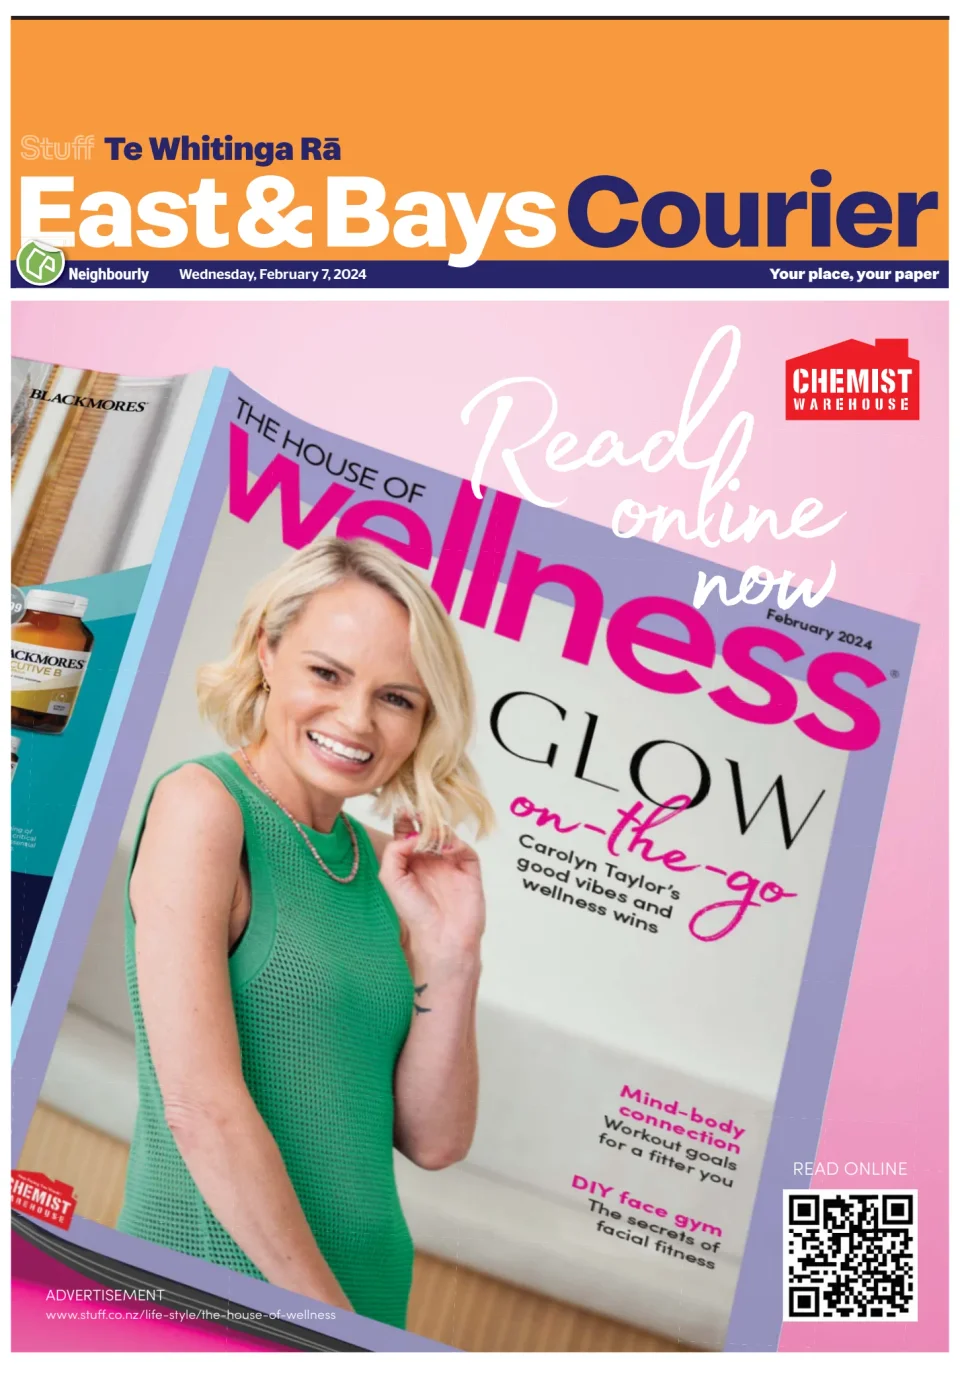 Eastern Bays Courier